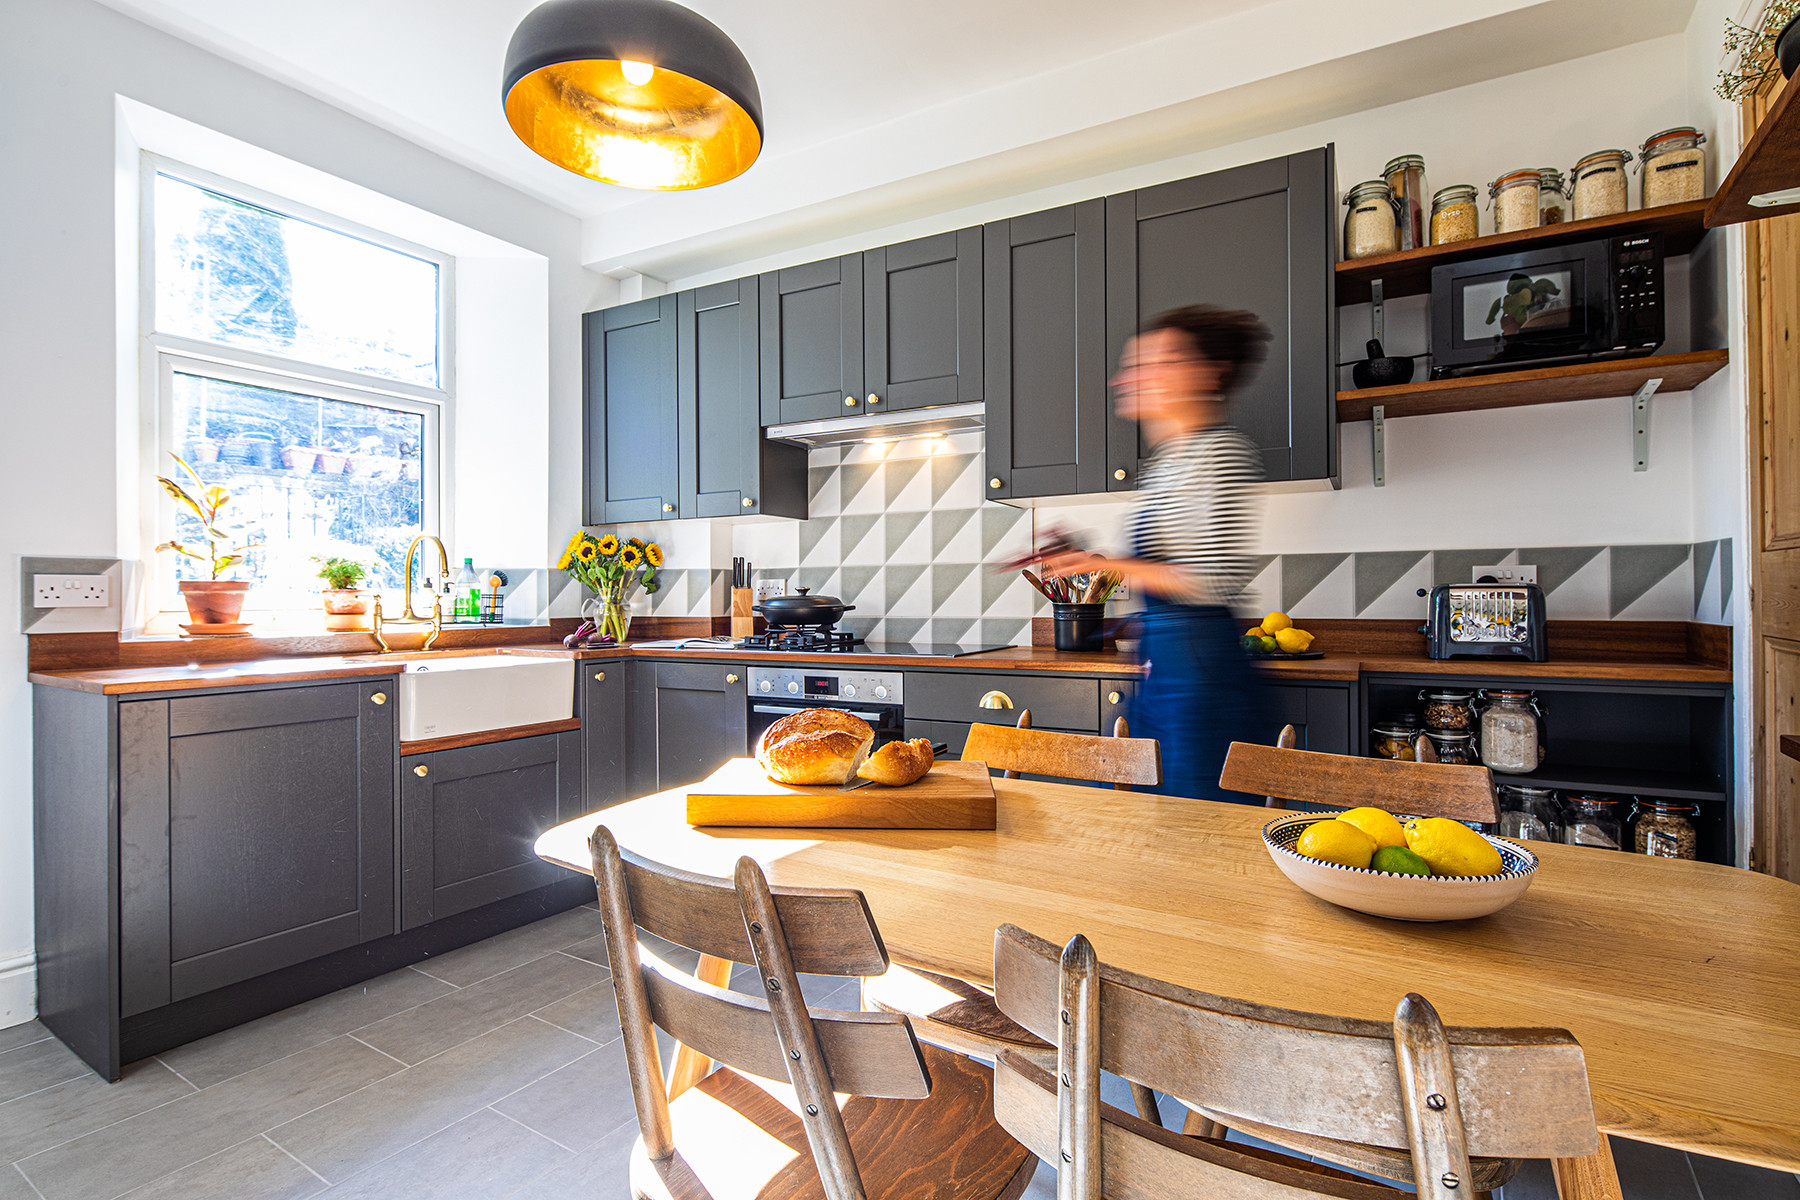 Which Alternative Materials Could I Use For My Kitchen Carcasses Houzz Uk